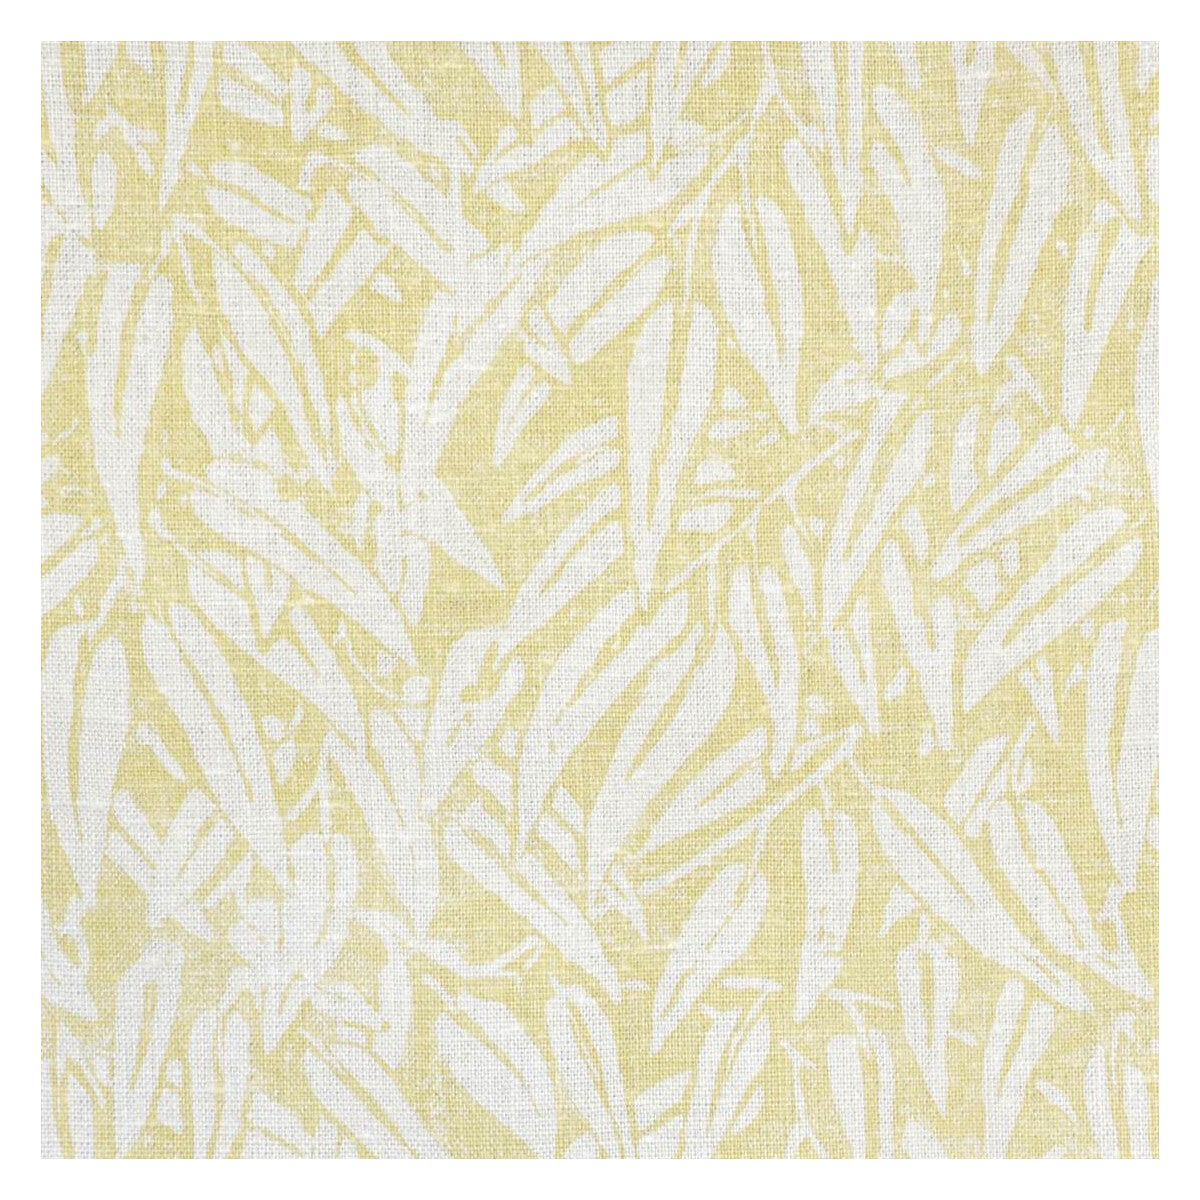 Willow fabric in yellow color - pattern BFC-3513.40.0 - by Lee Jofa in the Blithfield collection